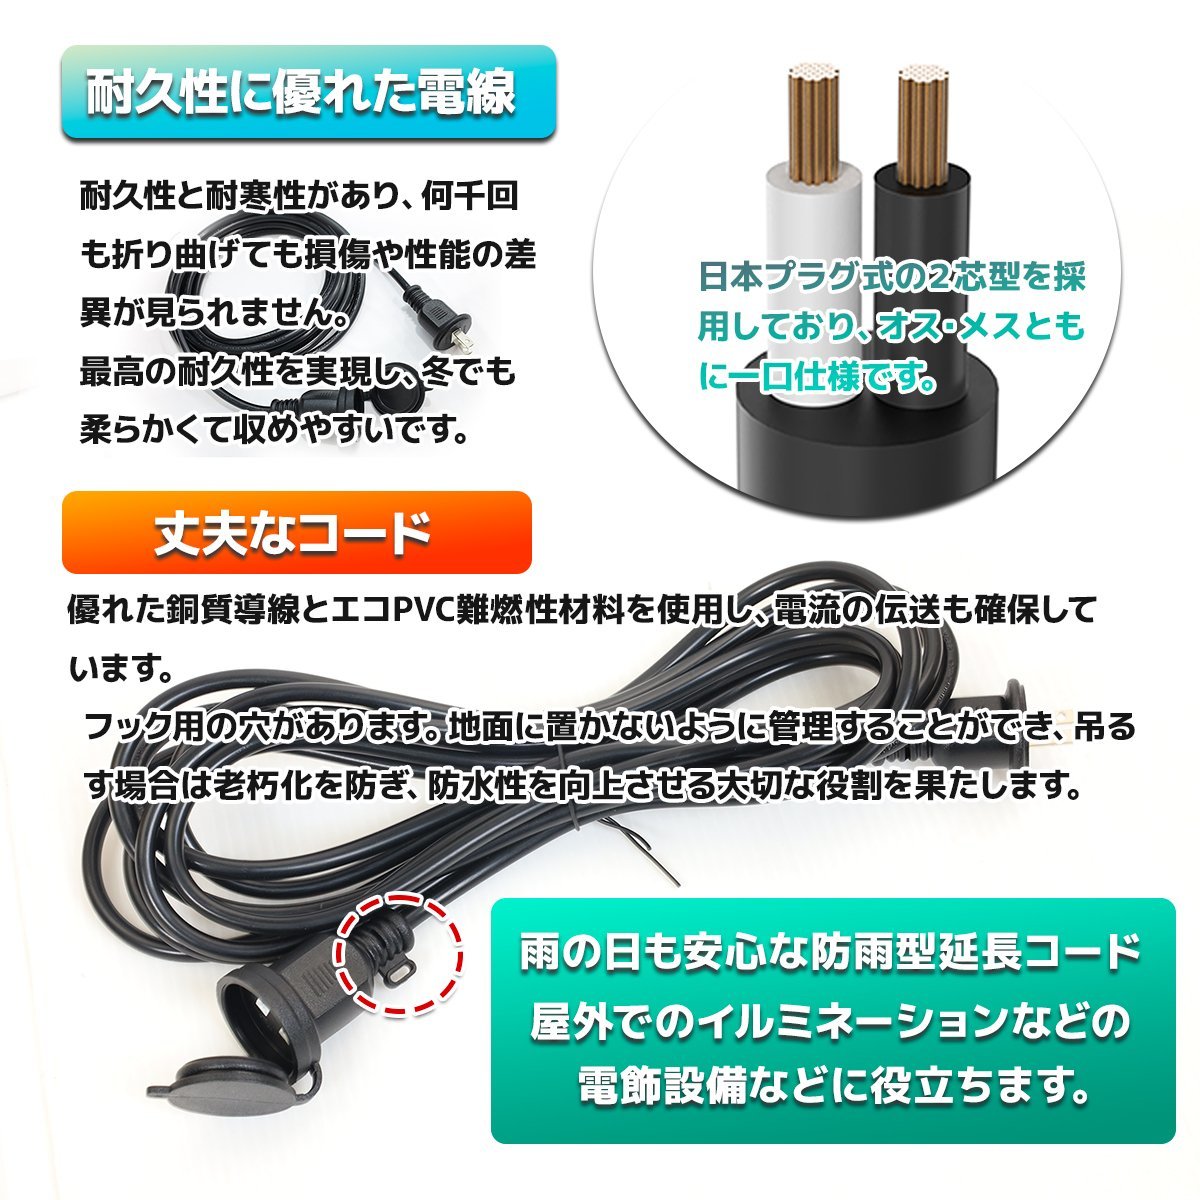 PSE Mark acquisition! power supply extender 5m 15A 1 mouth 1500W till outdoors power supply extension cable waterproof enduring tiger  King with cover! illumination * TEL .